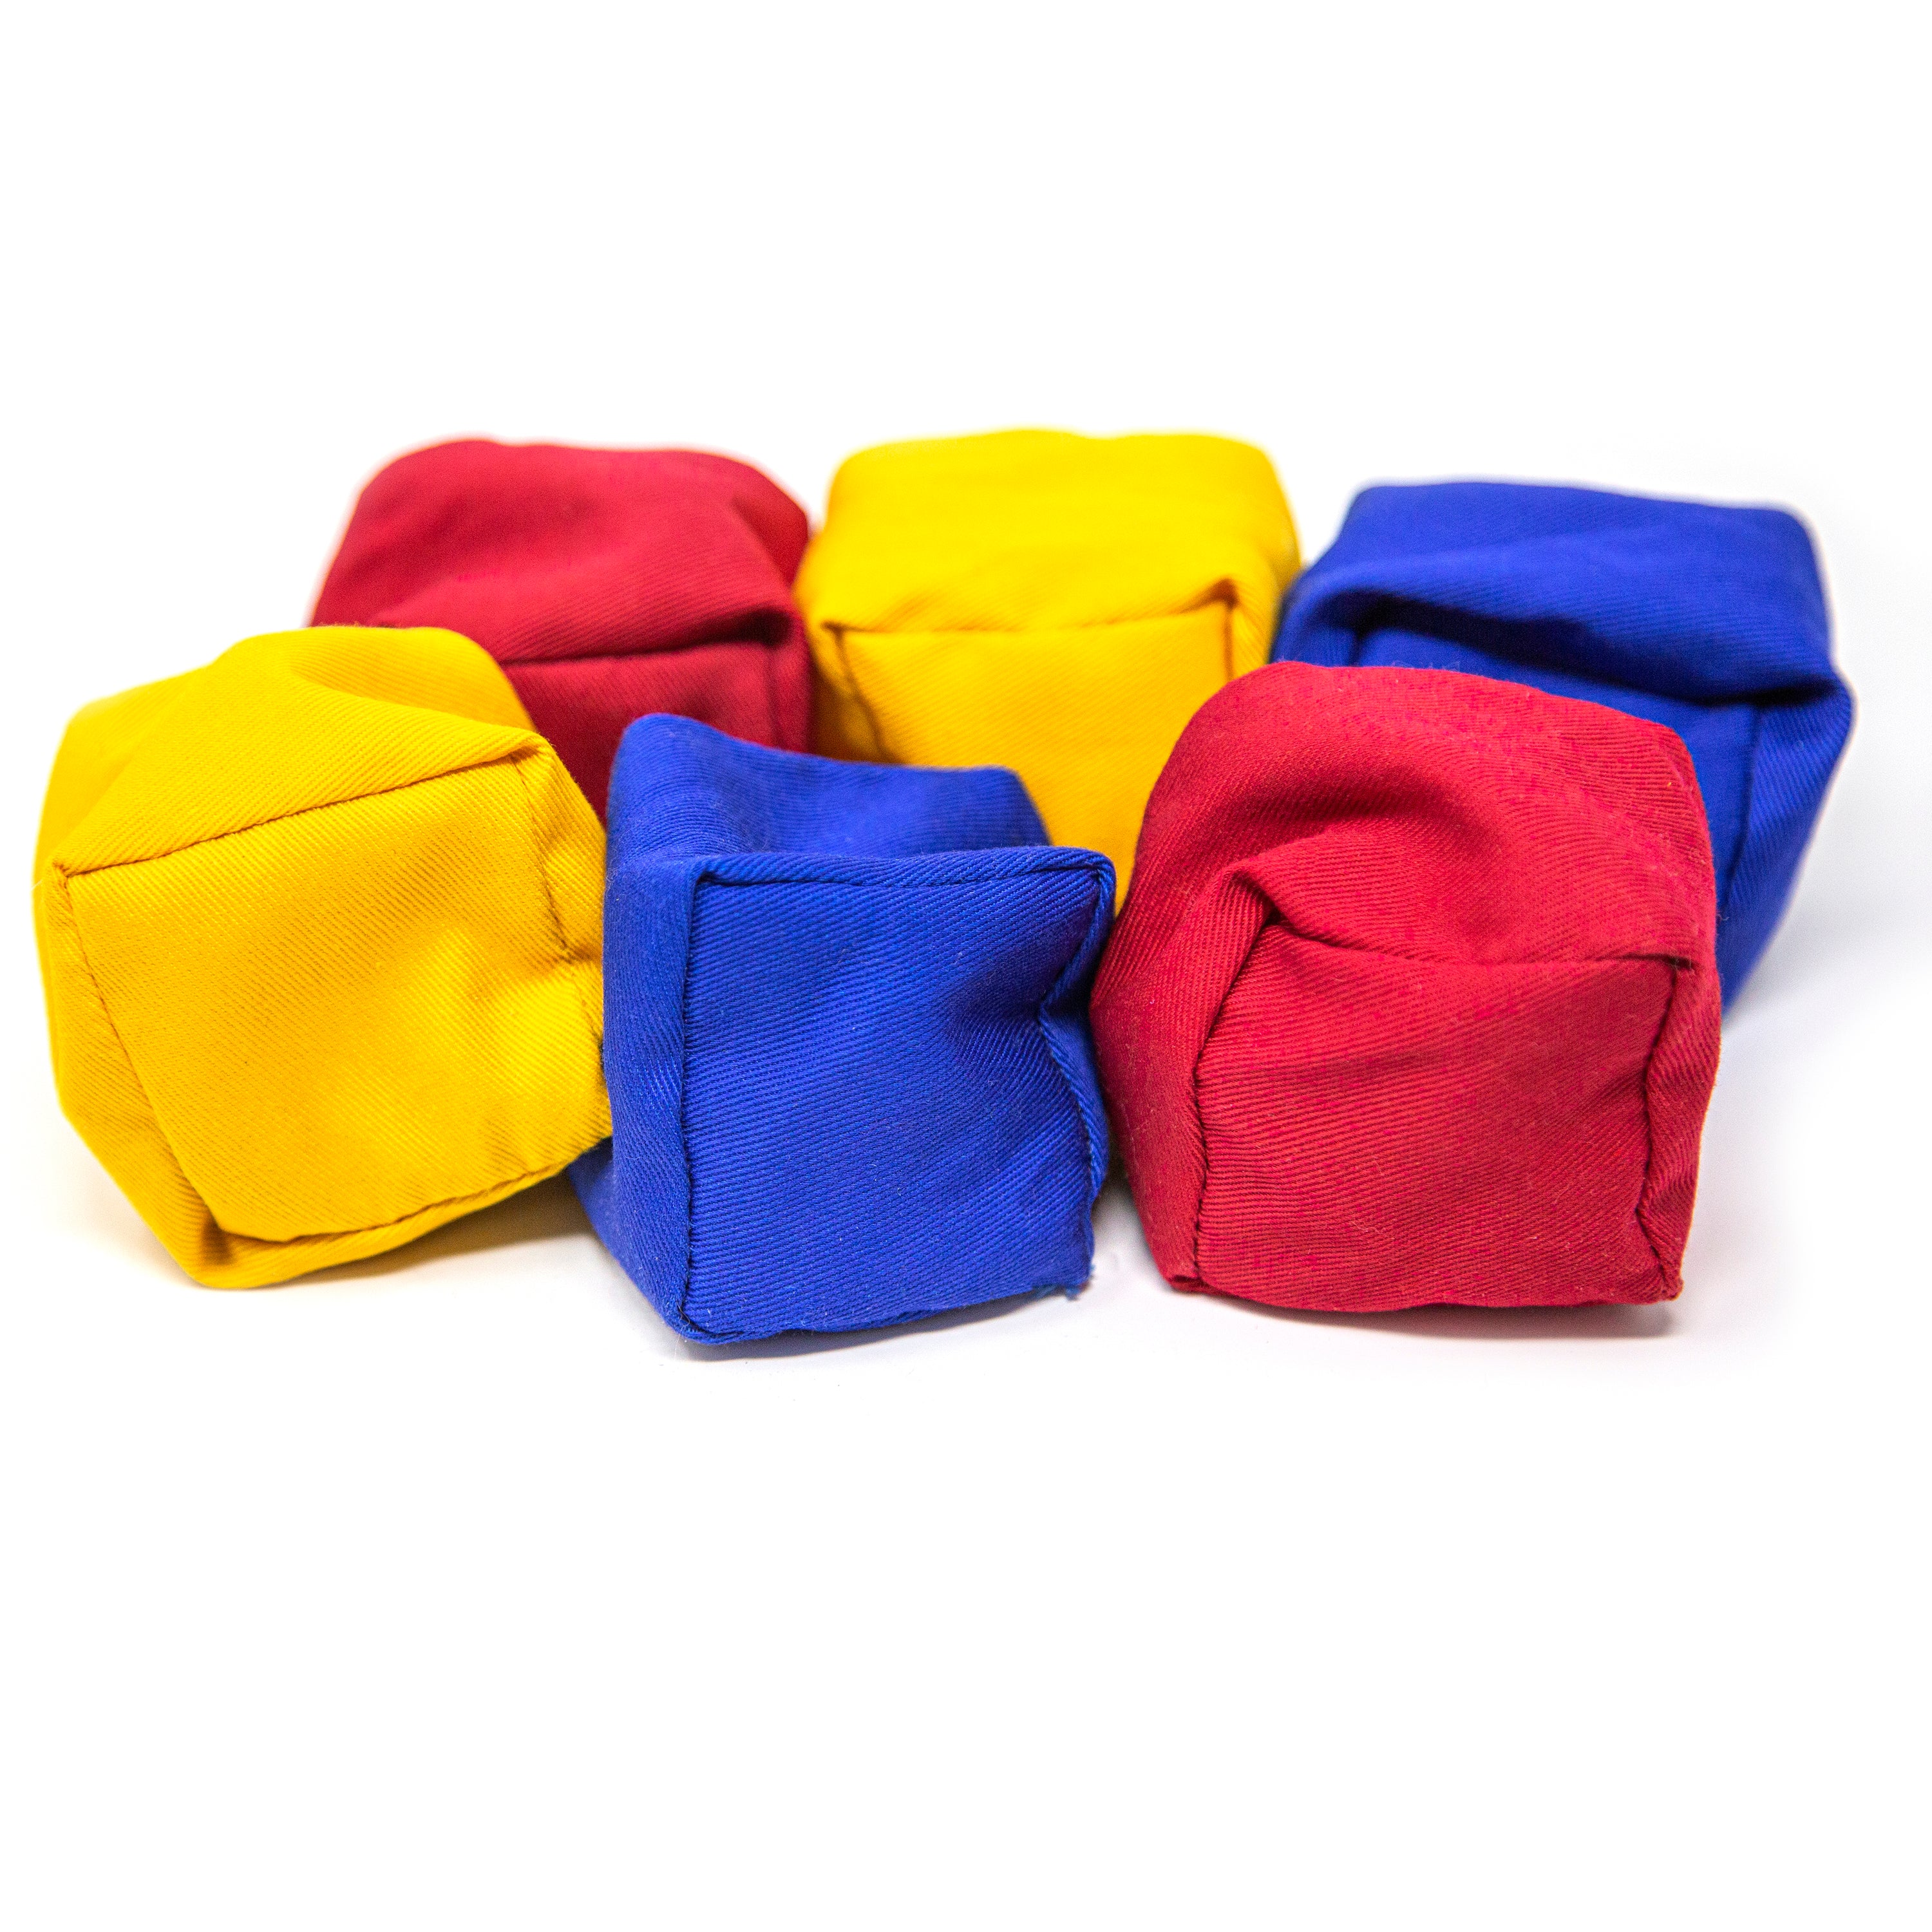 Two yellow, two red, and two blue cloth bean bags. 